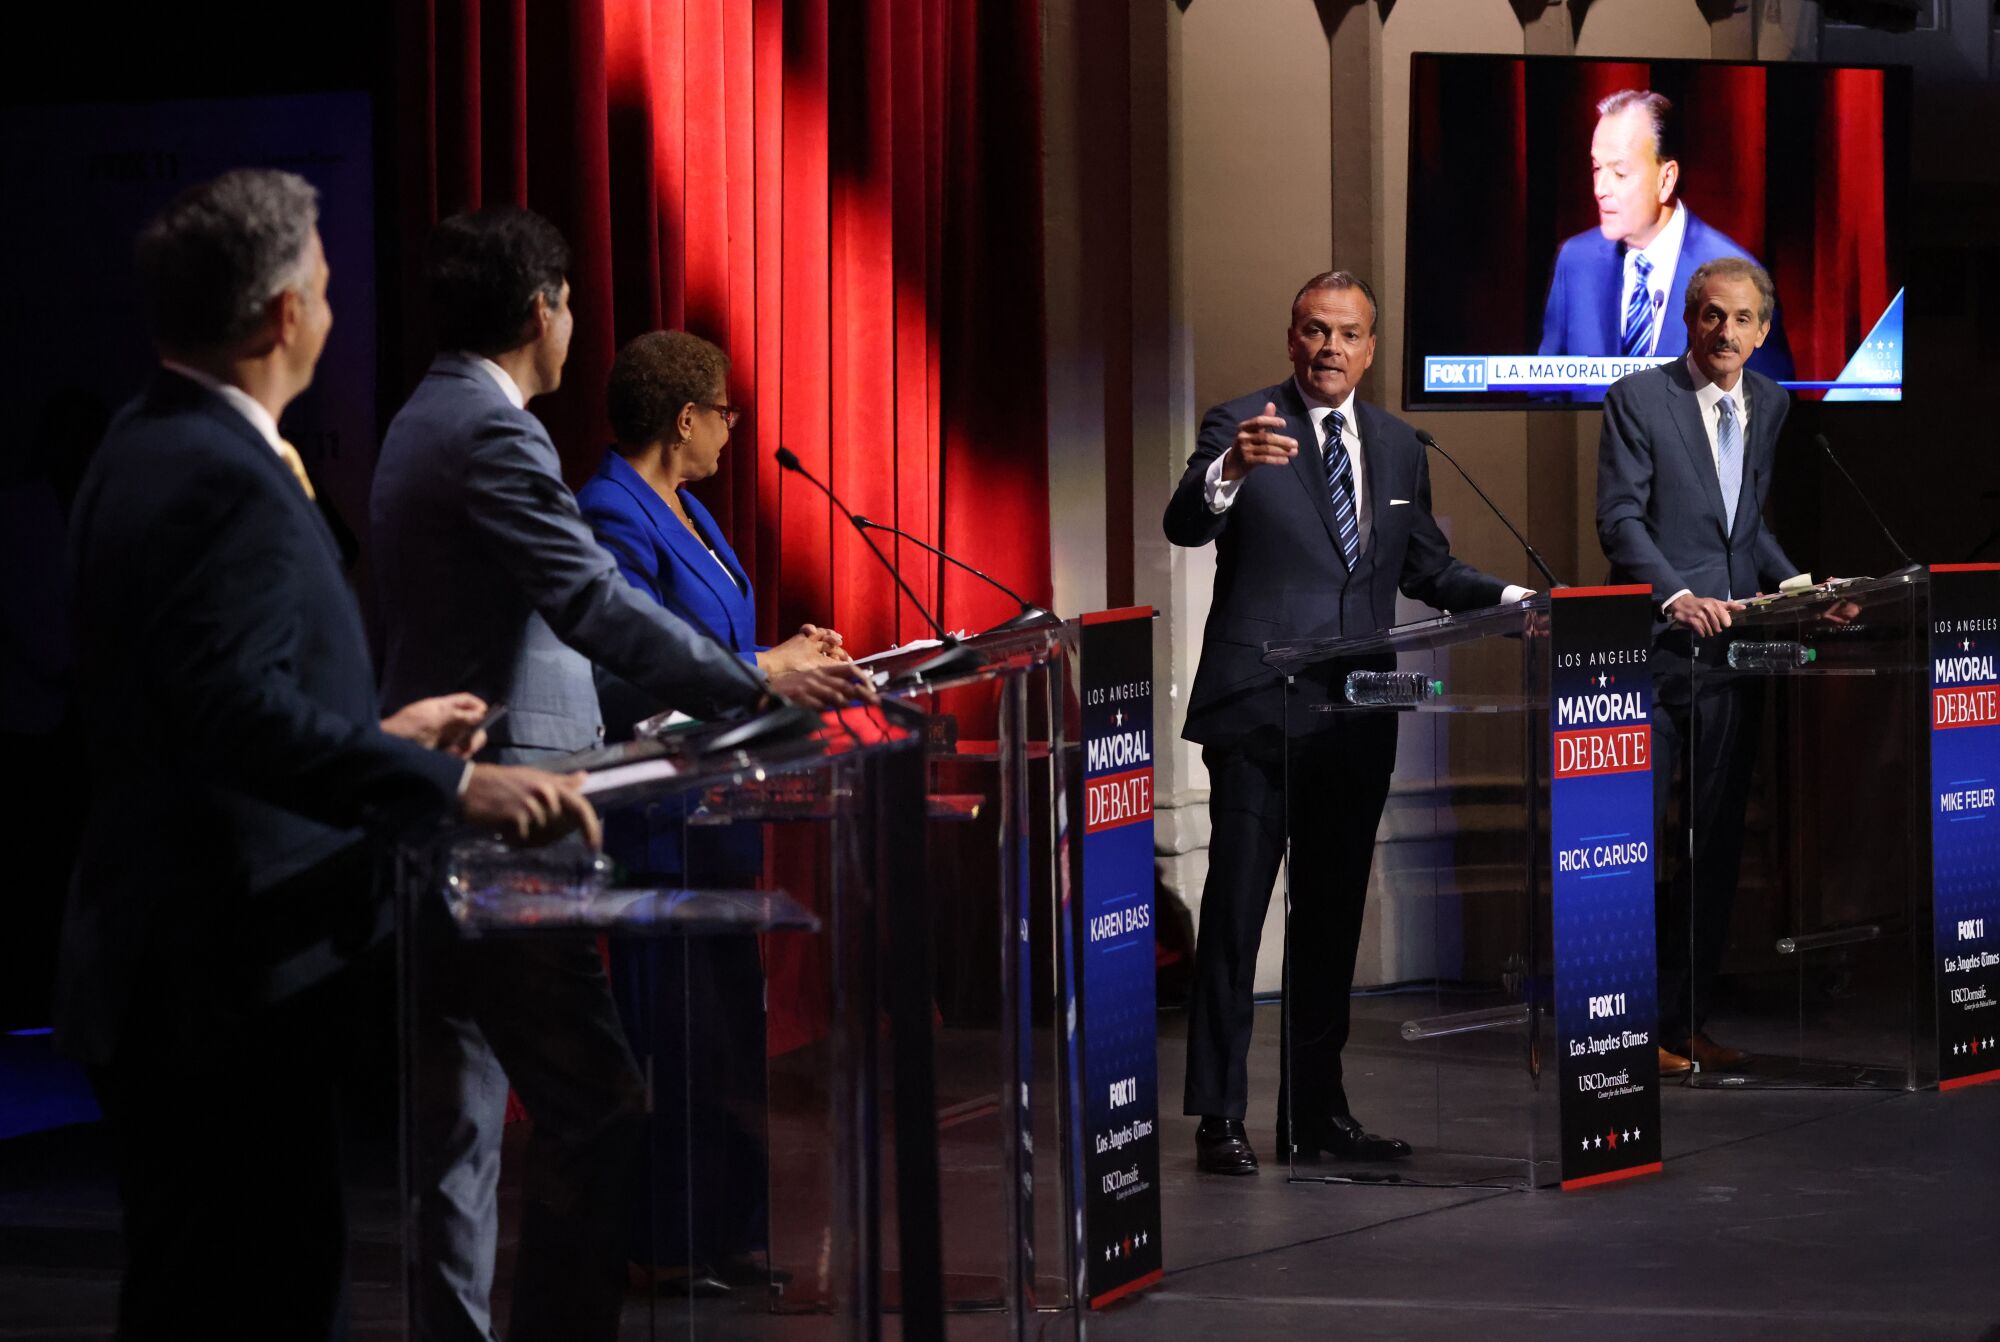 Businessman Rick Caruso, second from right, makes a rebuttal during the mayoral debate 